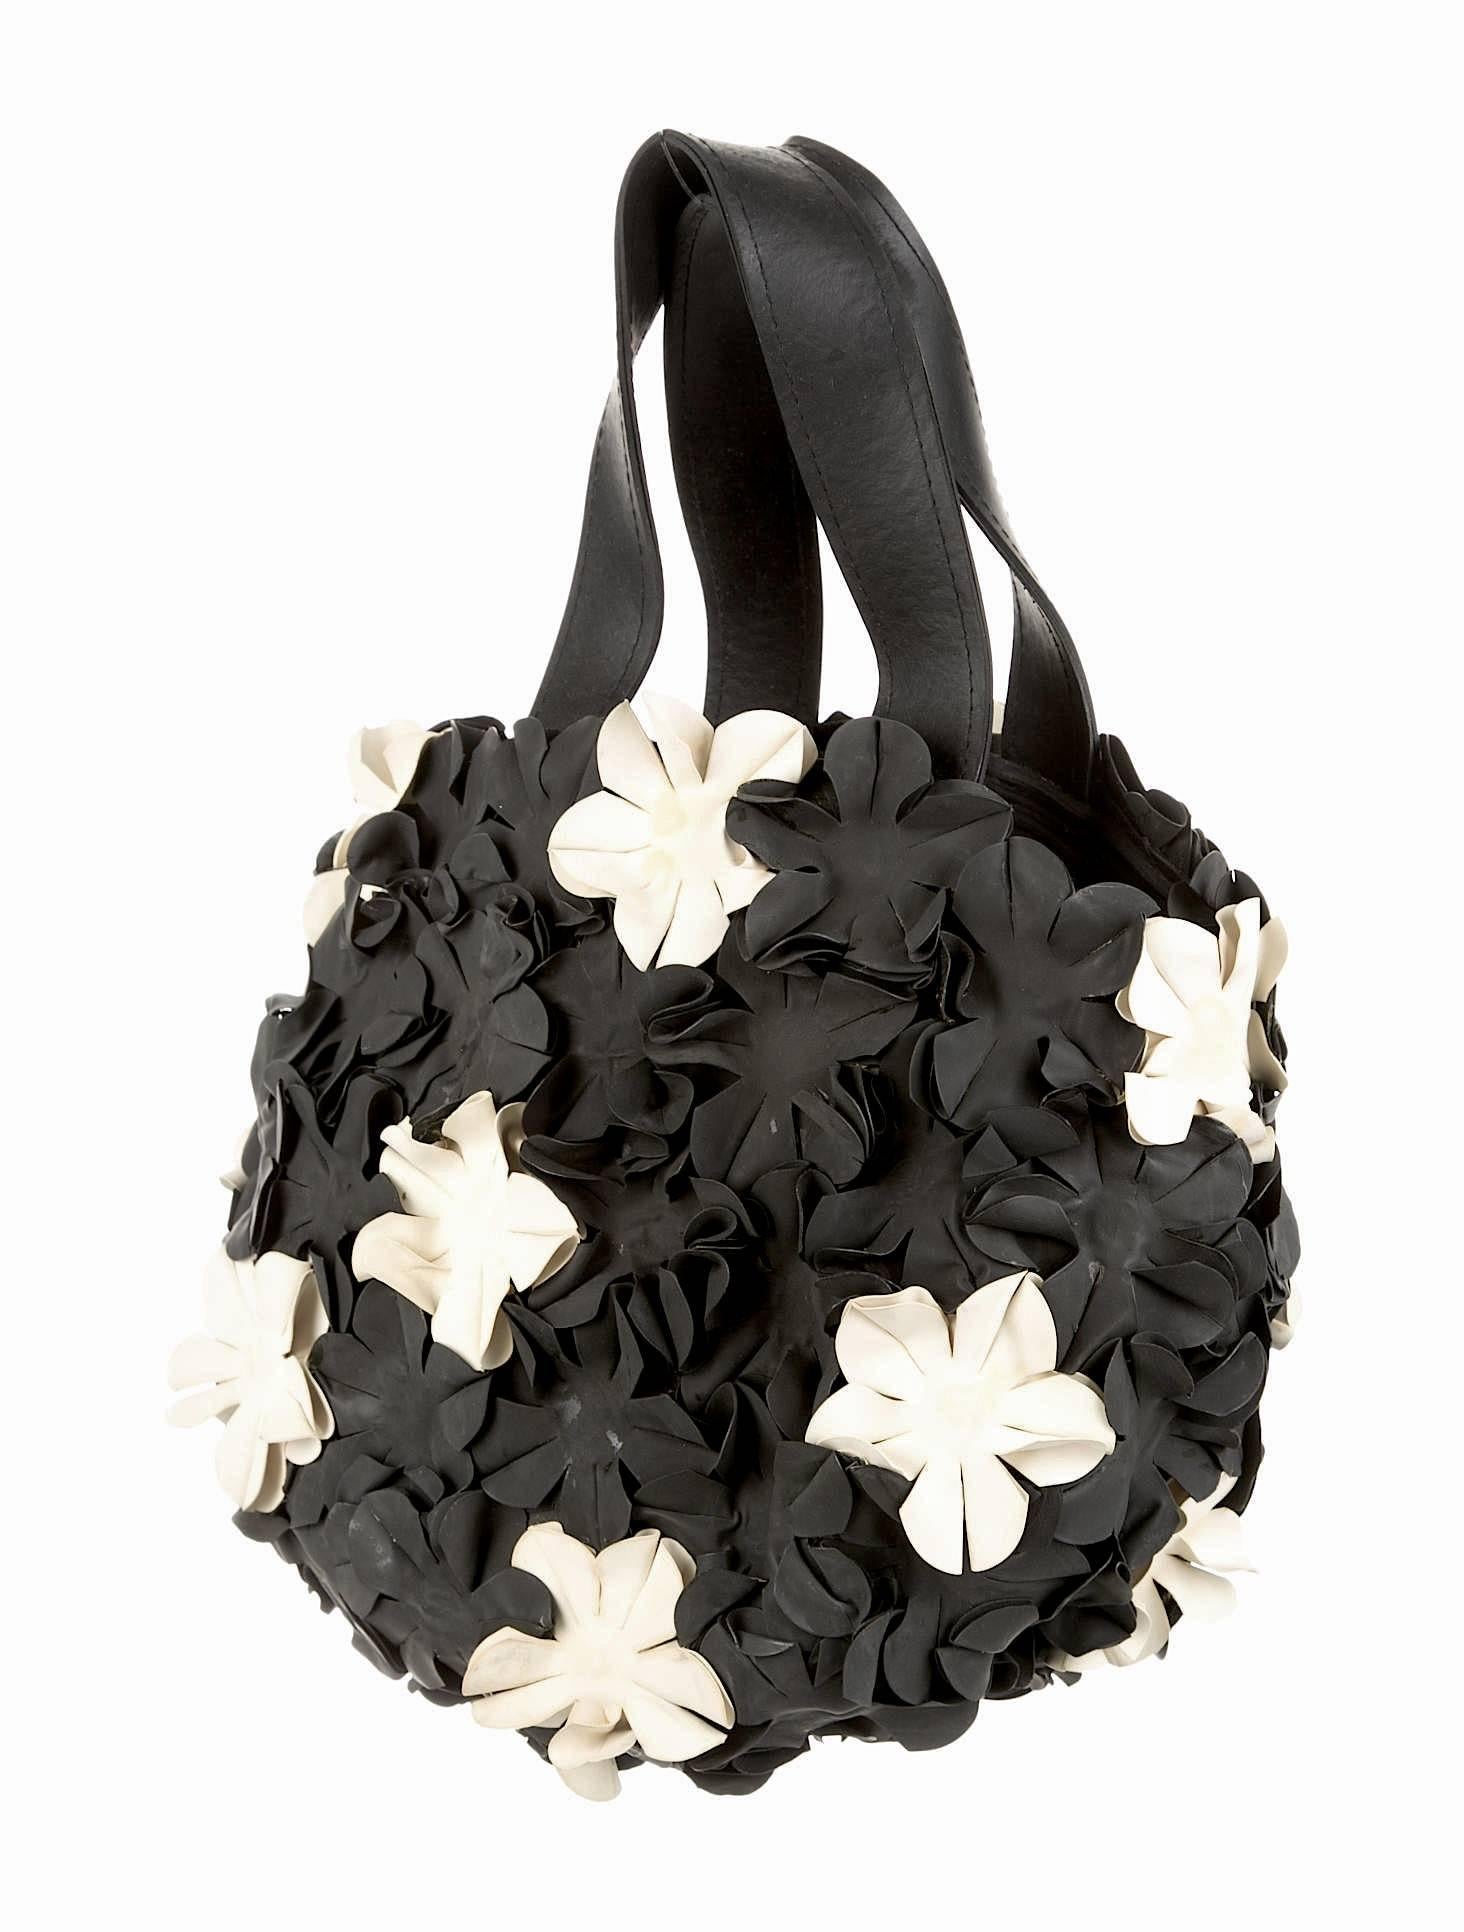 Black rubber Comme des Garçons handle bag with black and white flower appliqués throughout, flat handles and open top. 

Measurements: Handle Drop 5”, Height 8”, Width 9.5”, Depth 4”